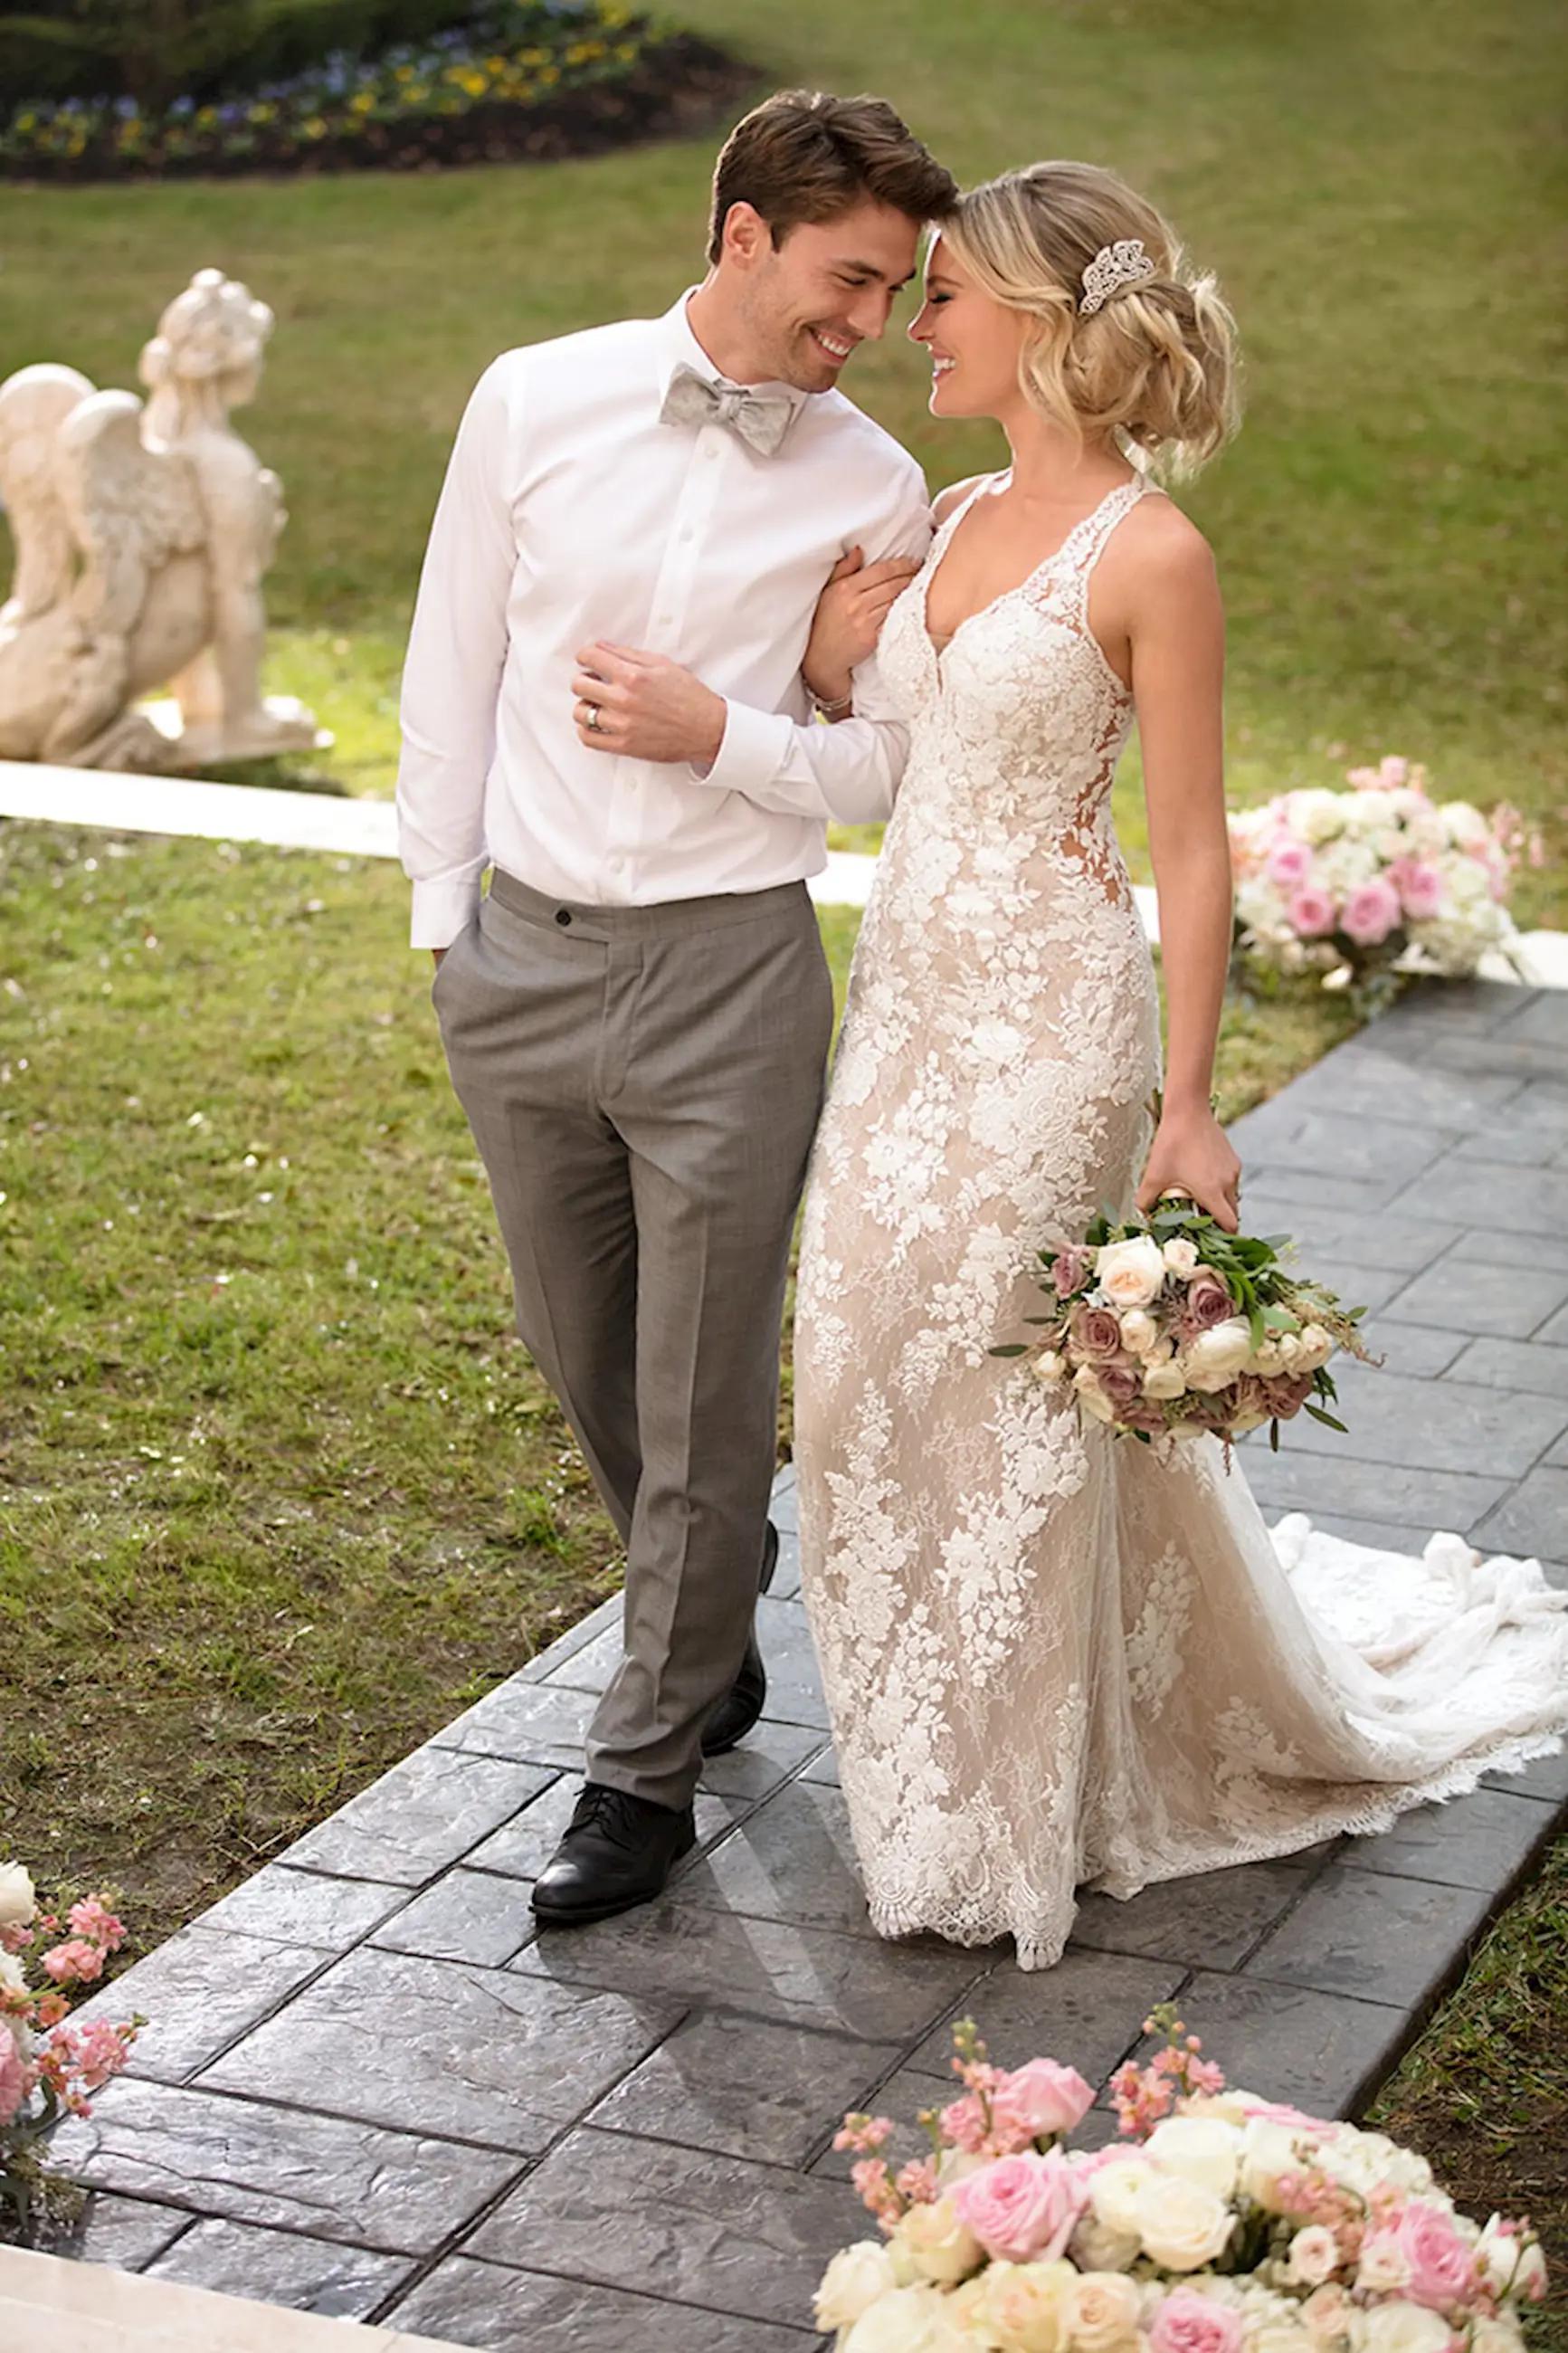 The Timeless Elegance of Lace:  Textured Fabric Options for Your Wedding Dress Image